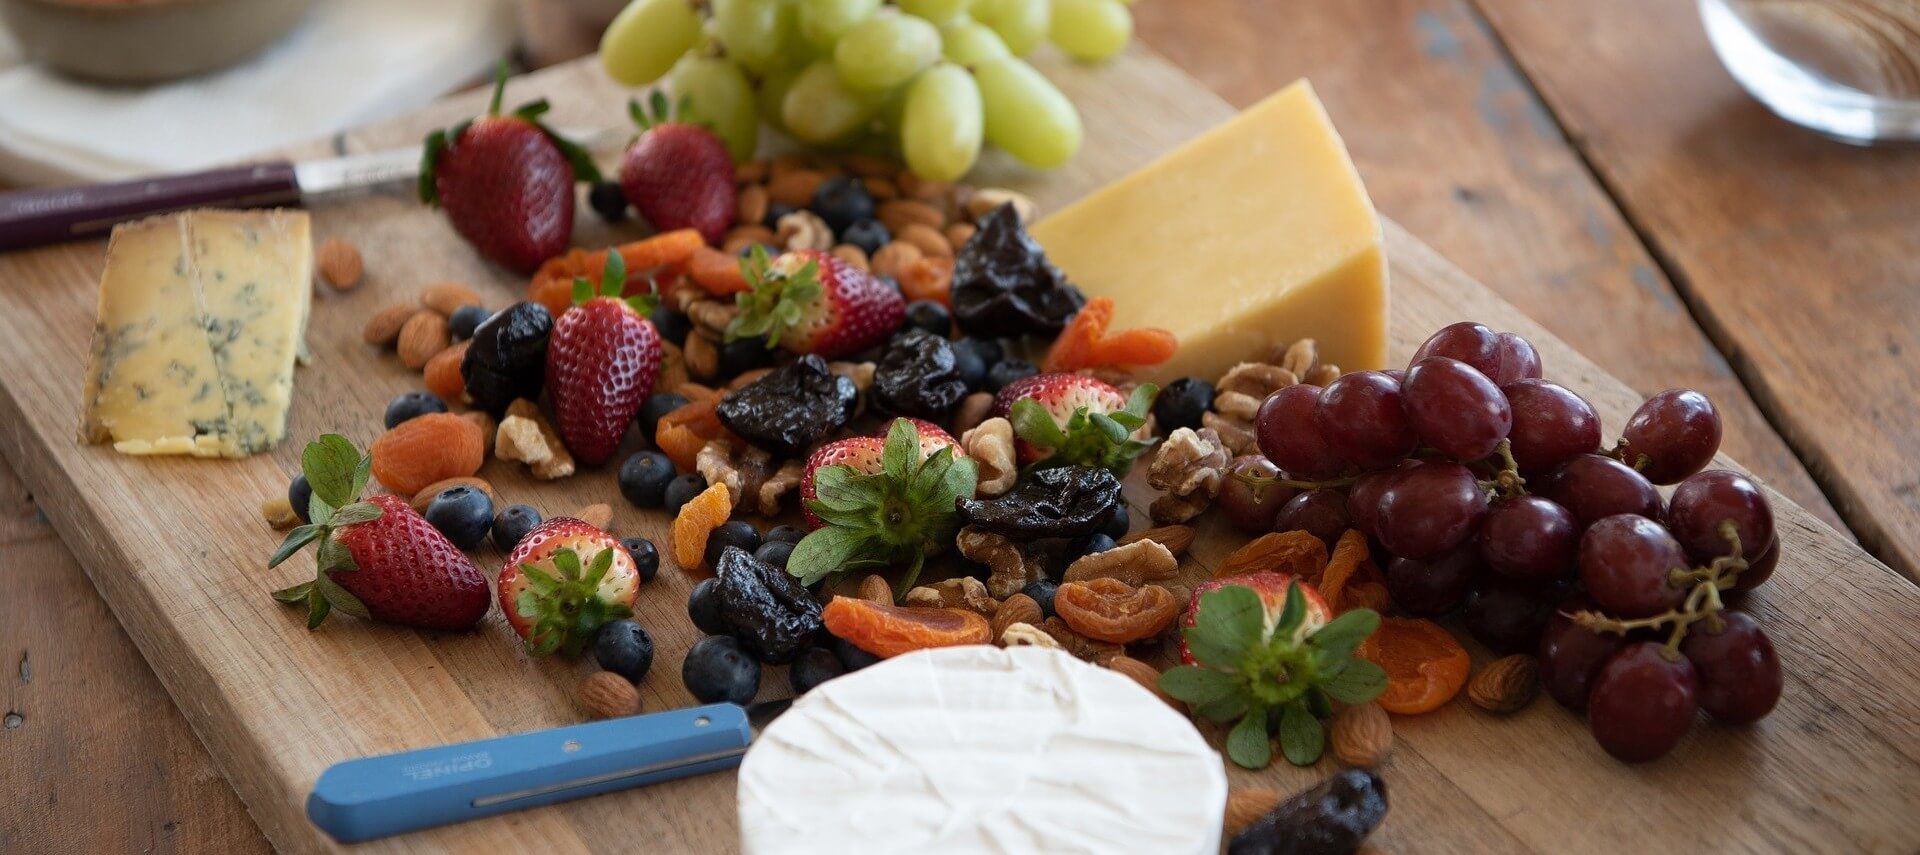 Cutting board full of fruit, nuts and wedges of three different types of cheese